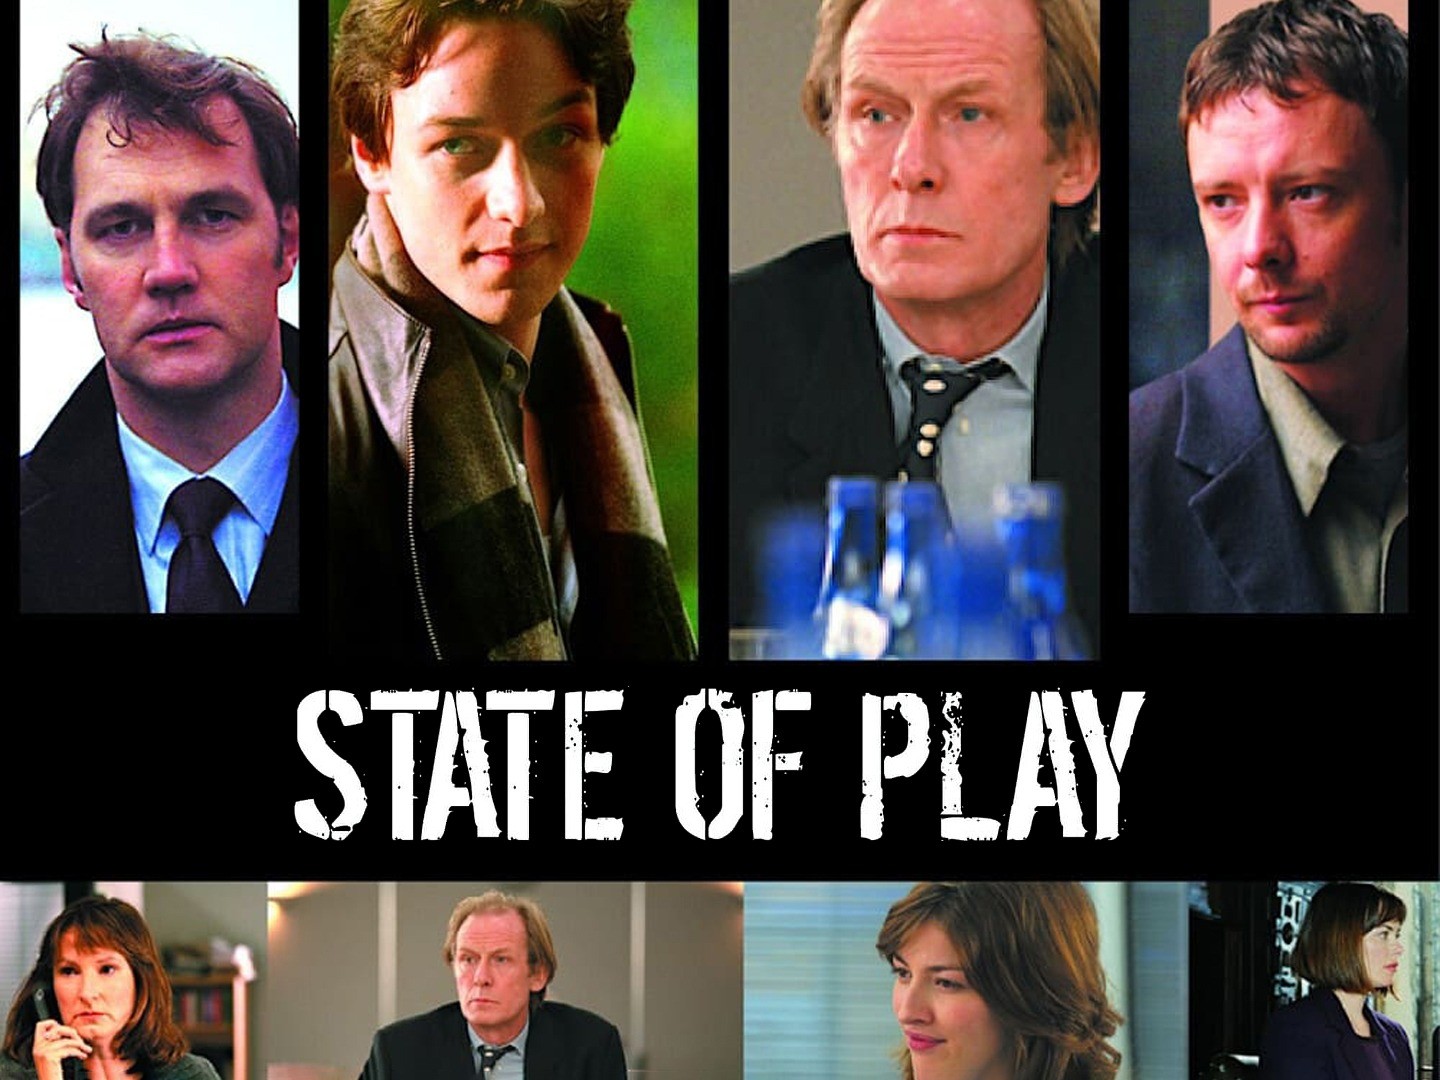 State of Play (2003) - BBC America Series